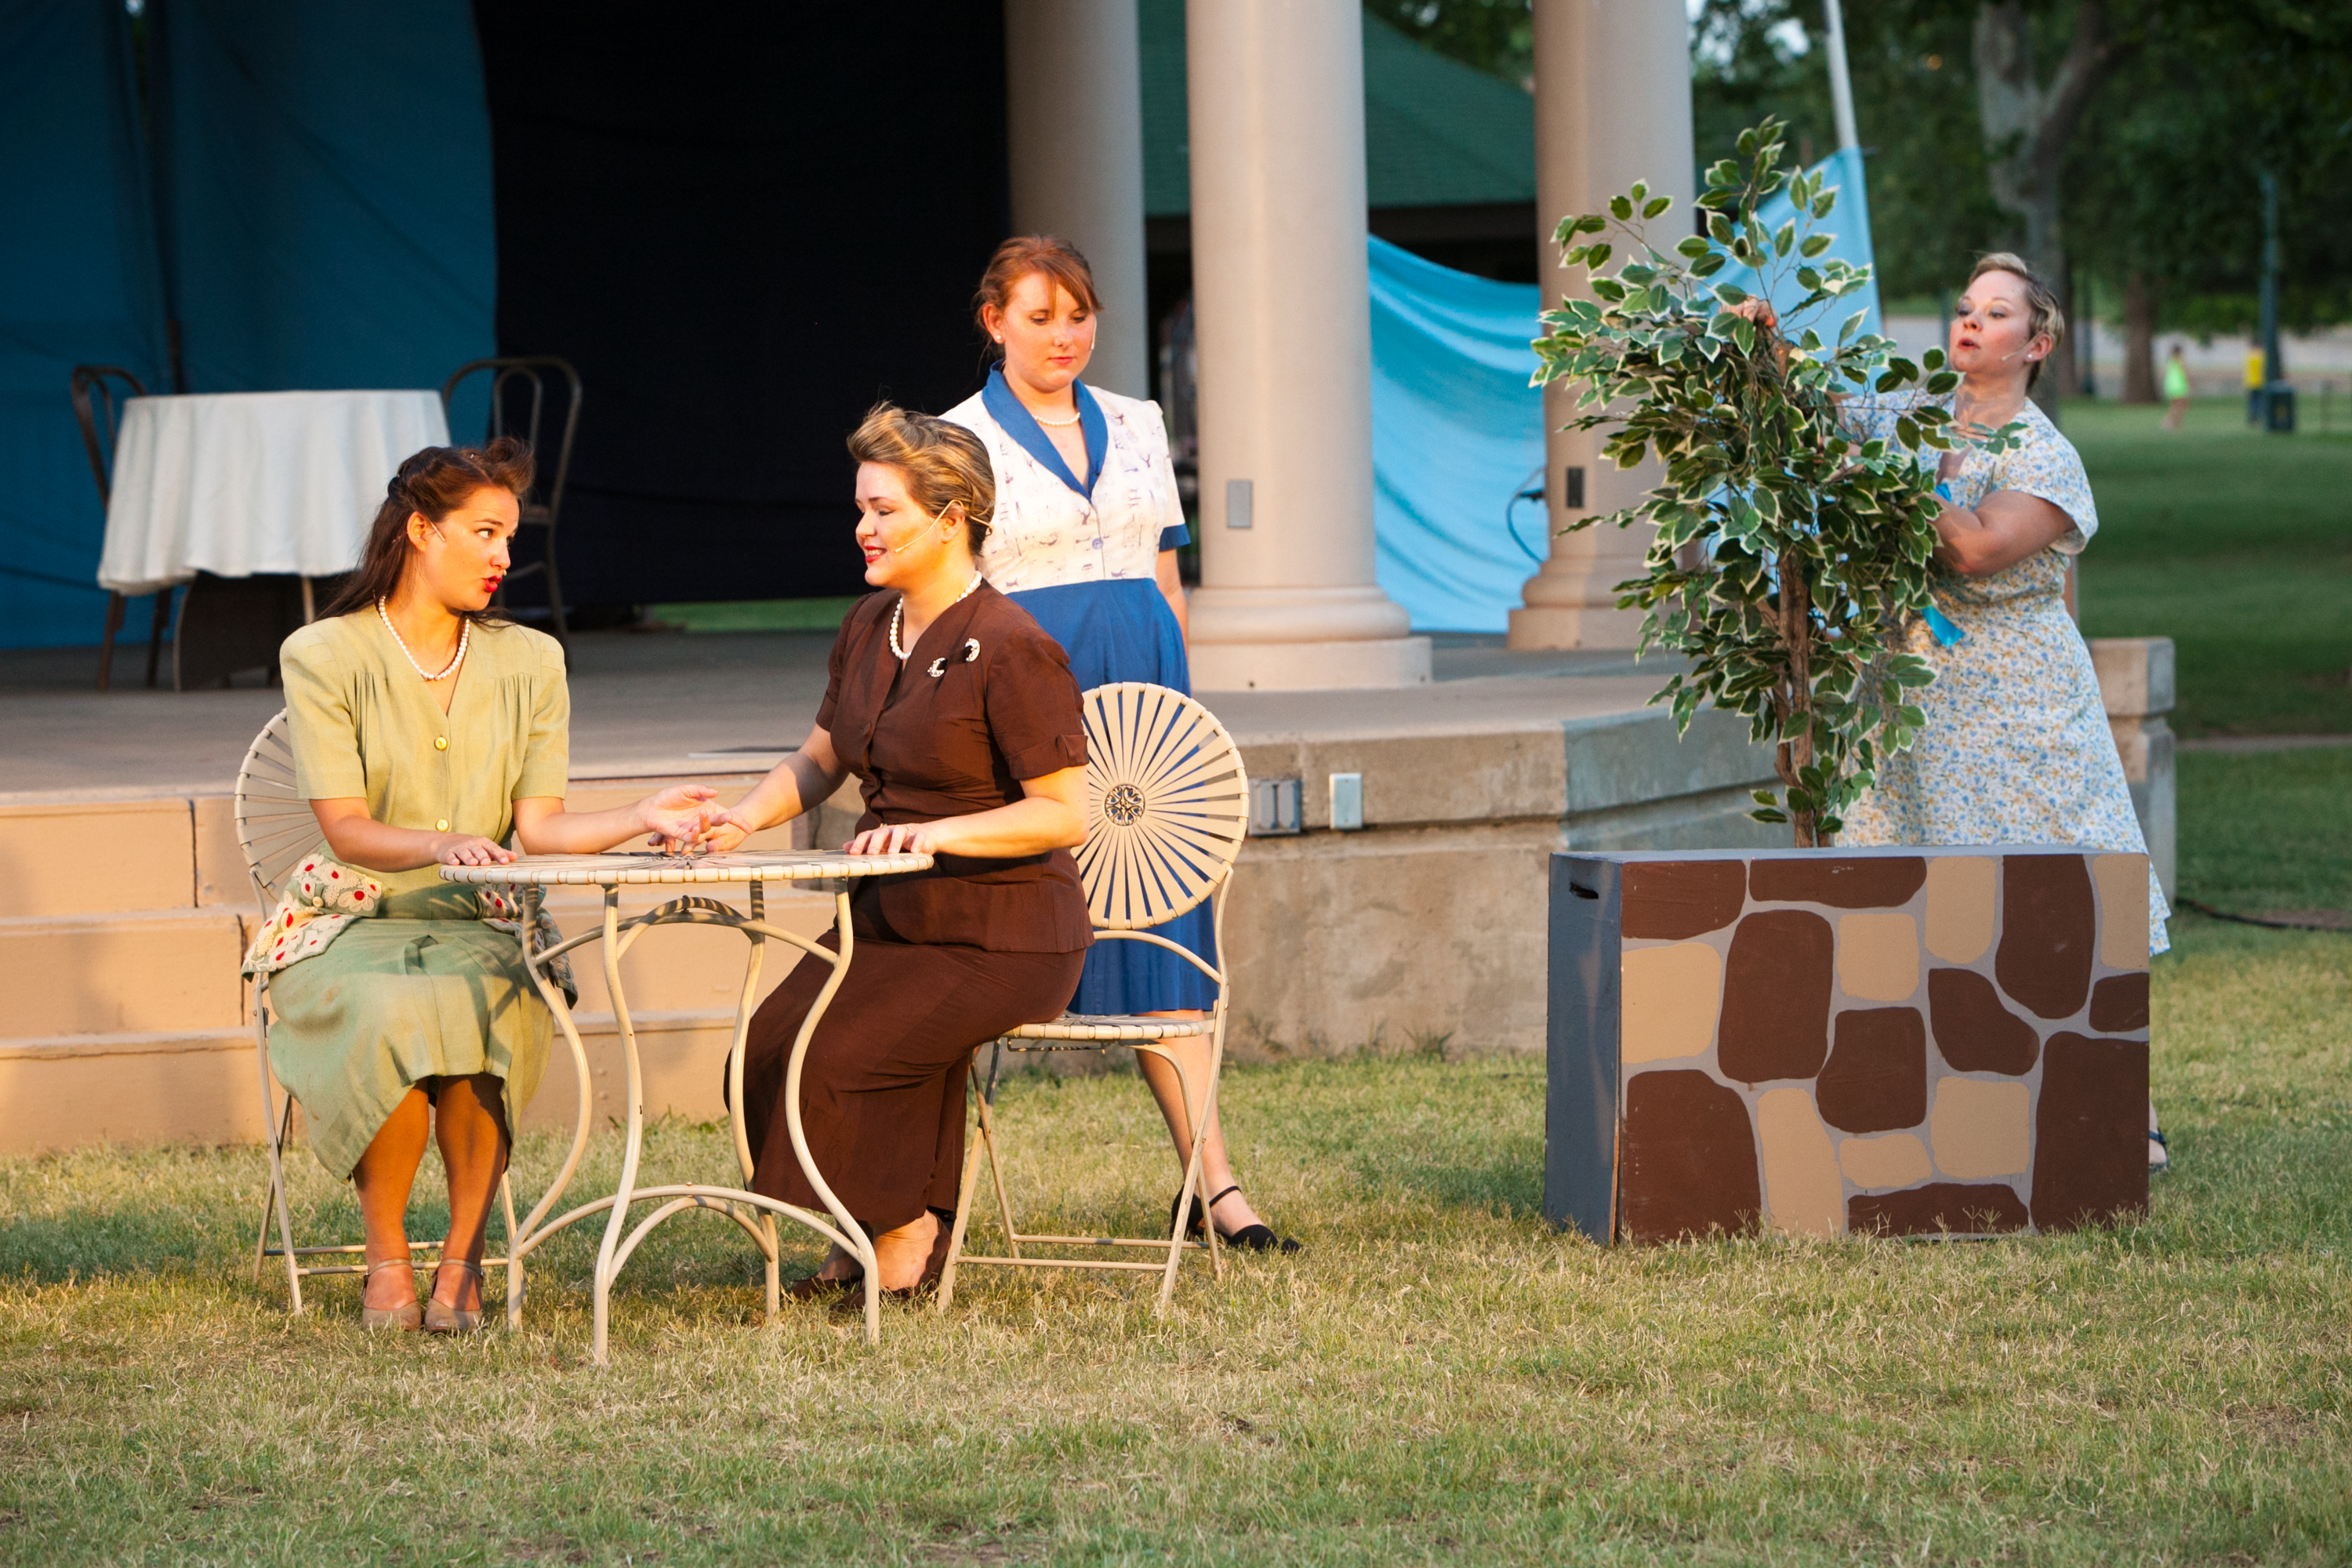 2013 - Much Ado About Nothing